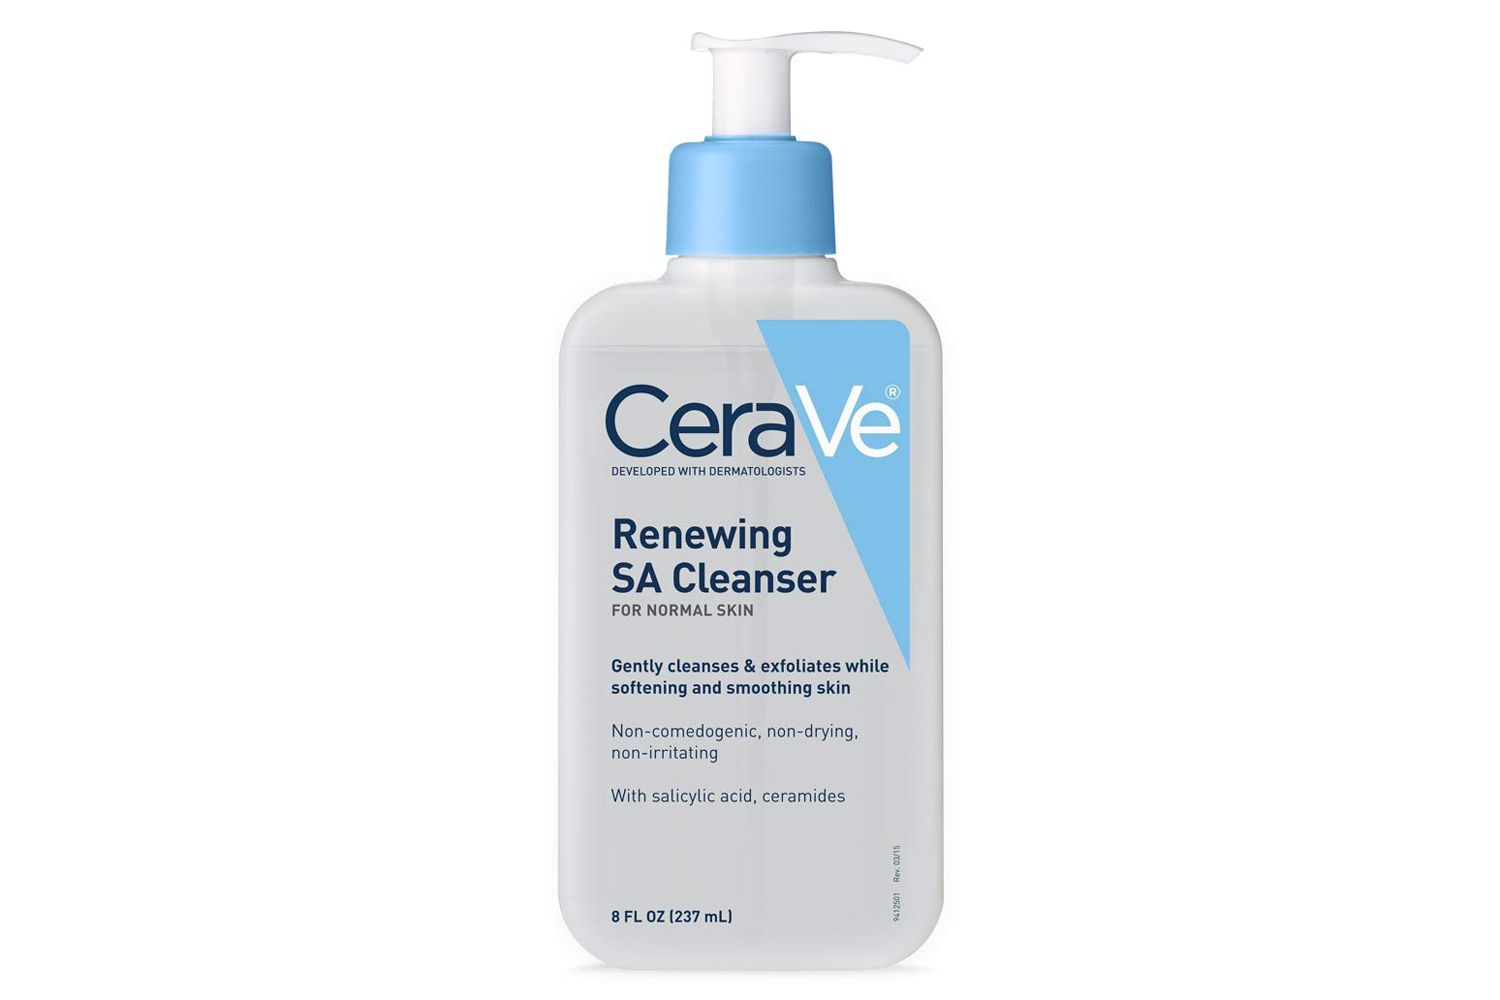 Cleave SA Cleanser